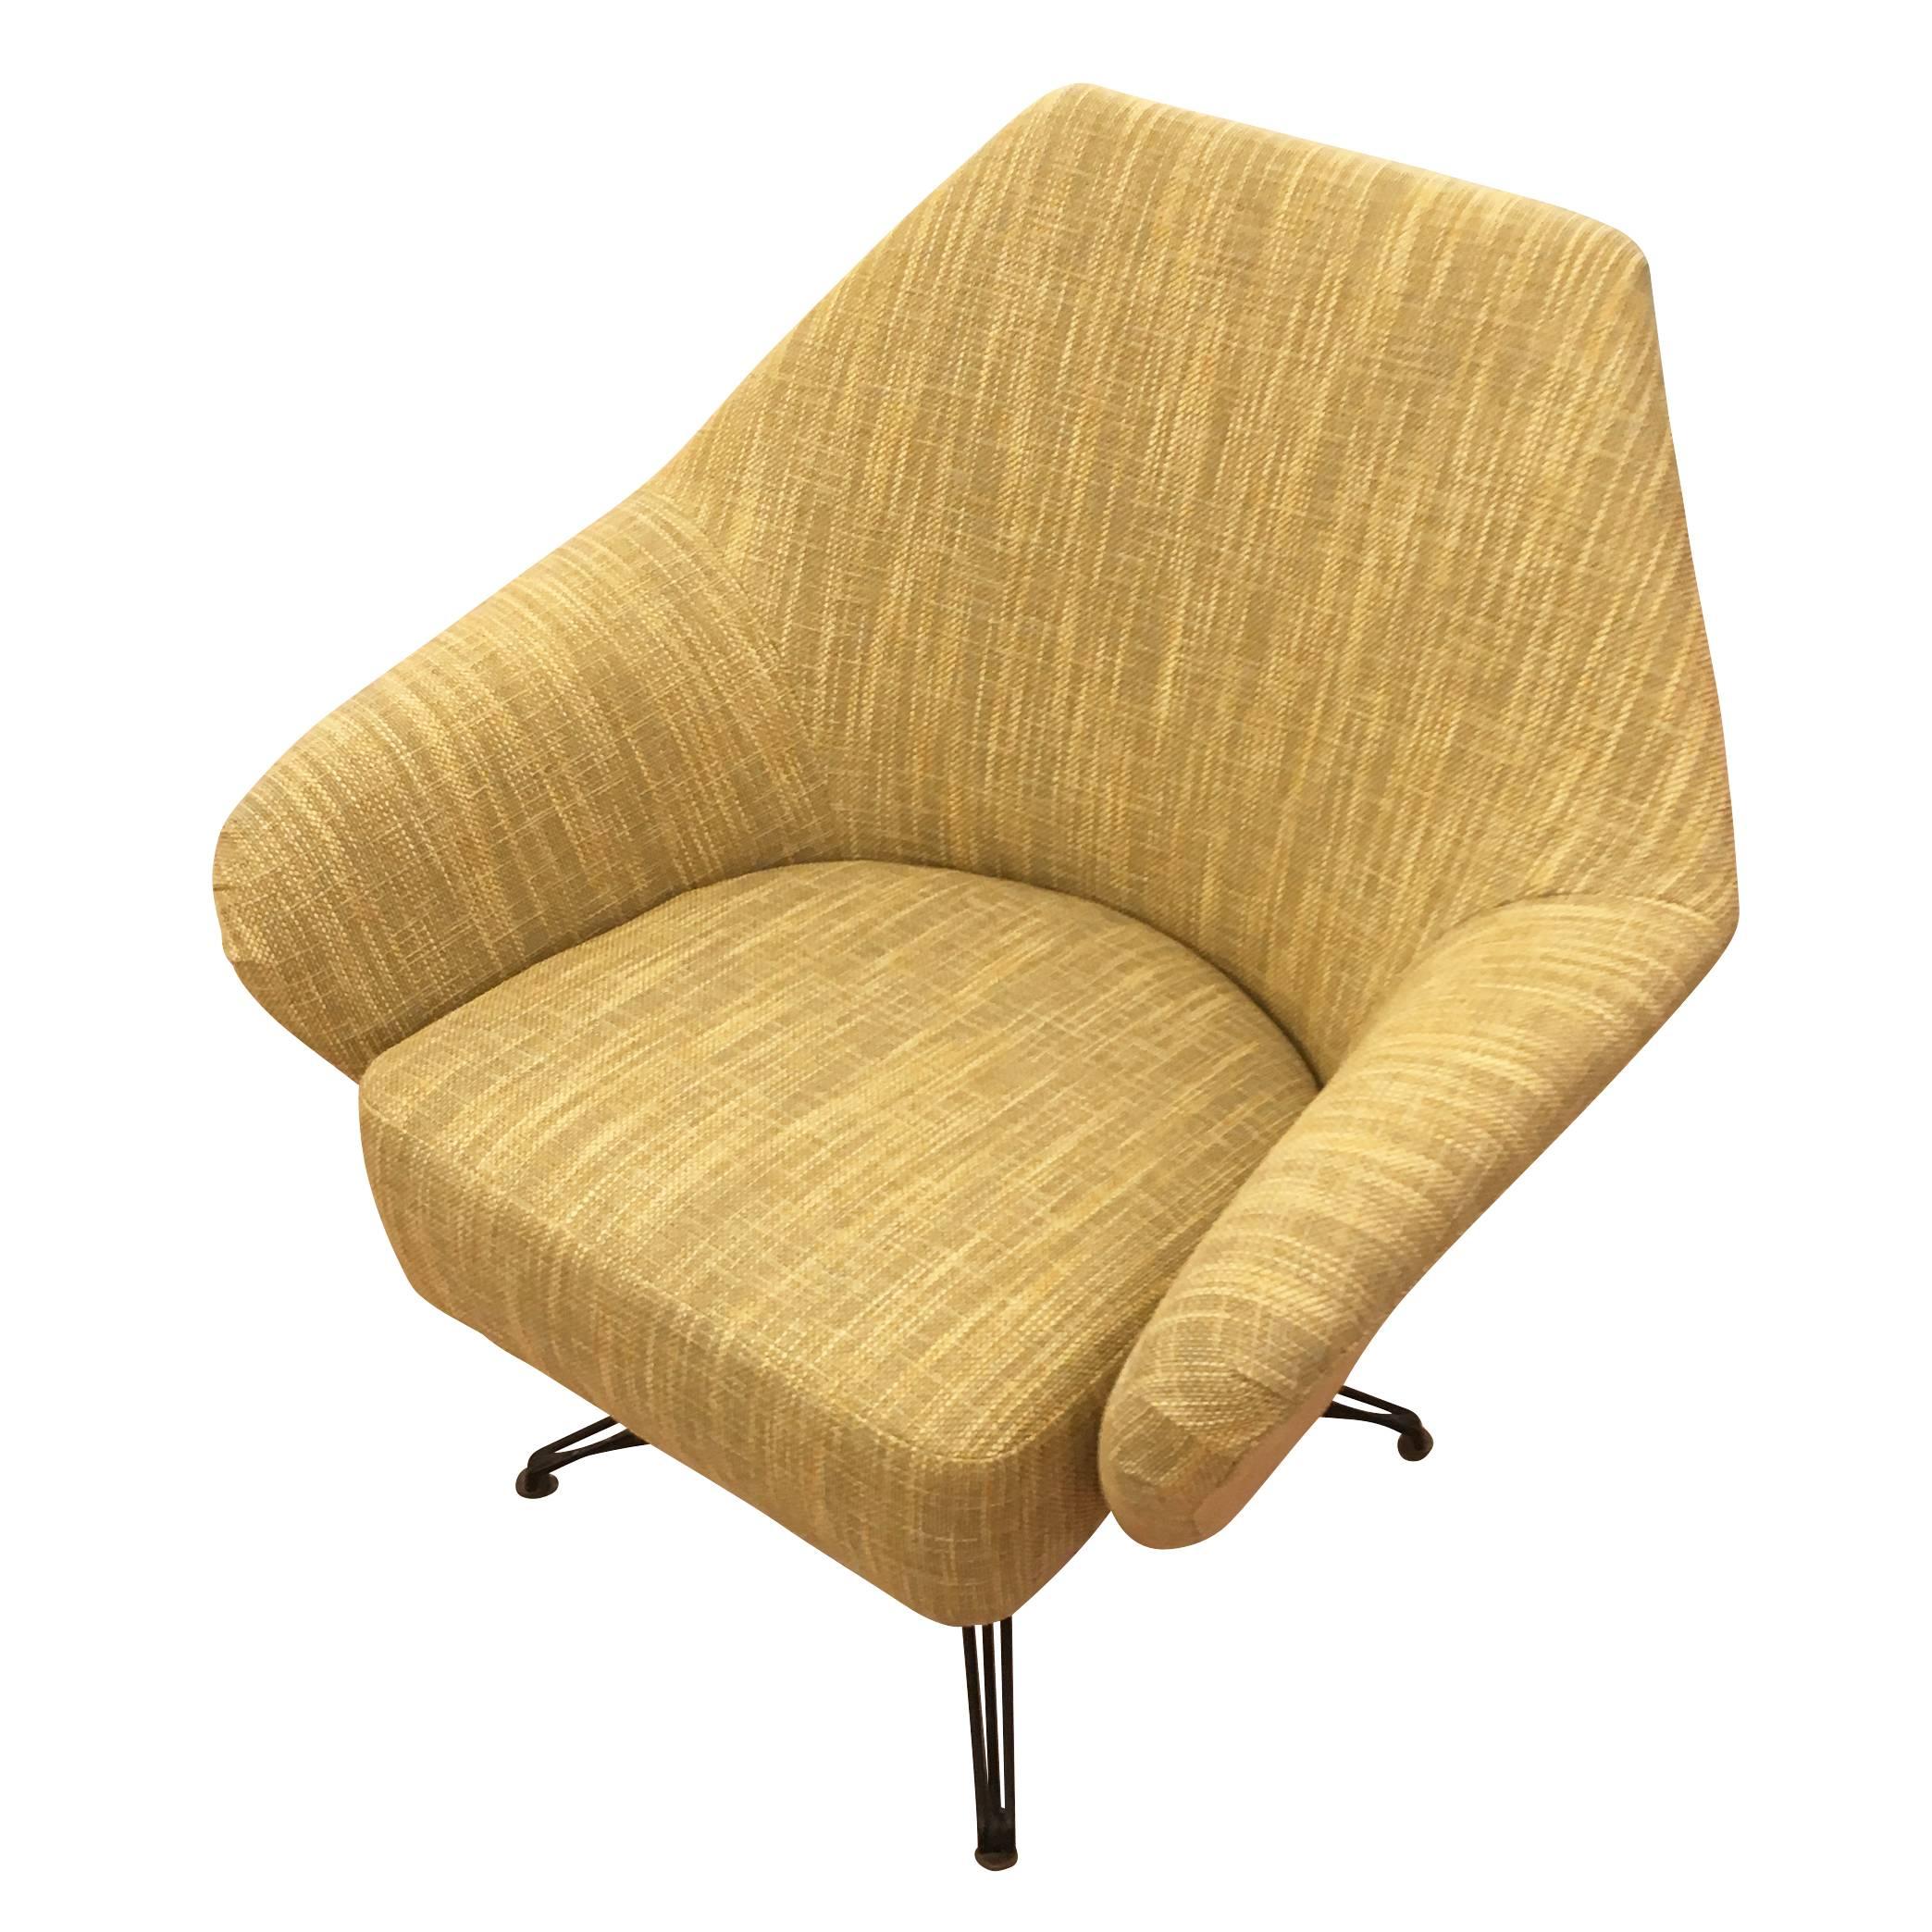 Timeless swivel lounge chair designed by Osvaldo Borsani for Techno in 1956. Has been re-upholstered in a textured mustard colored fabric. The legs are lacquered black. The flexible back makes it very comfortable.

